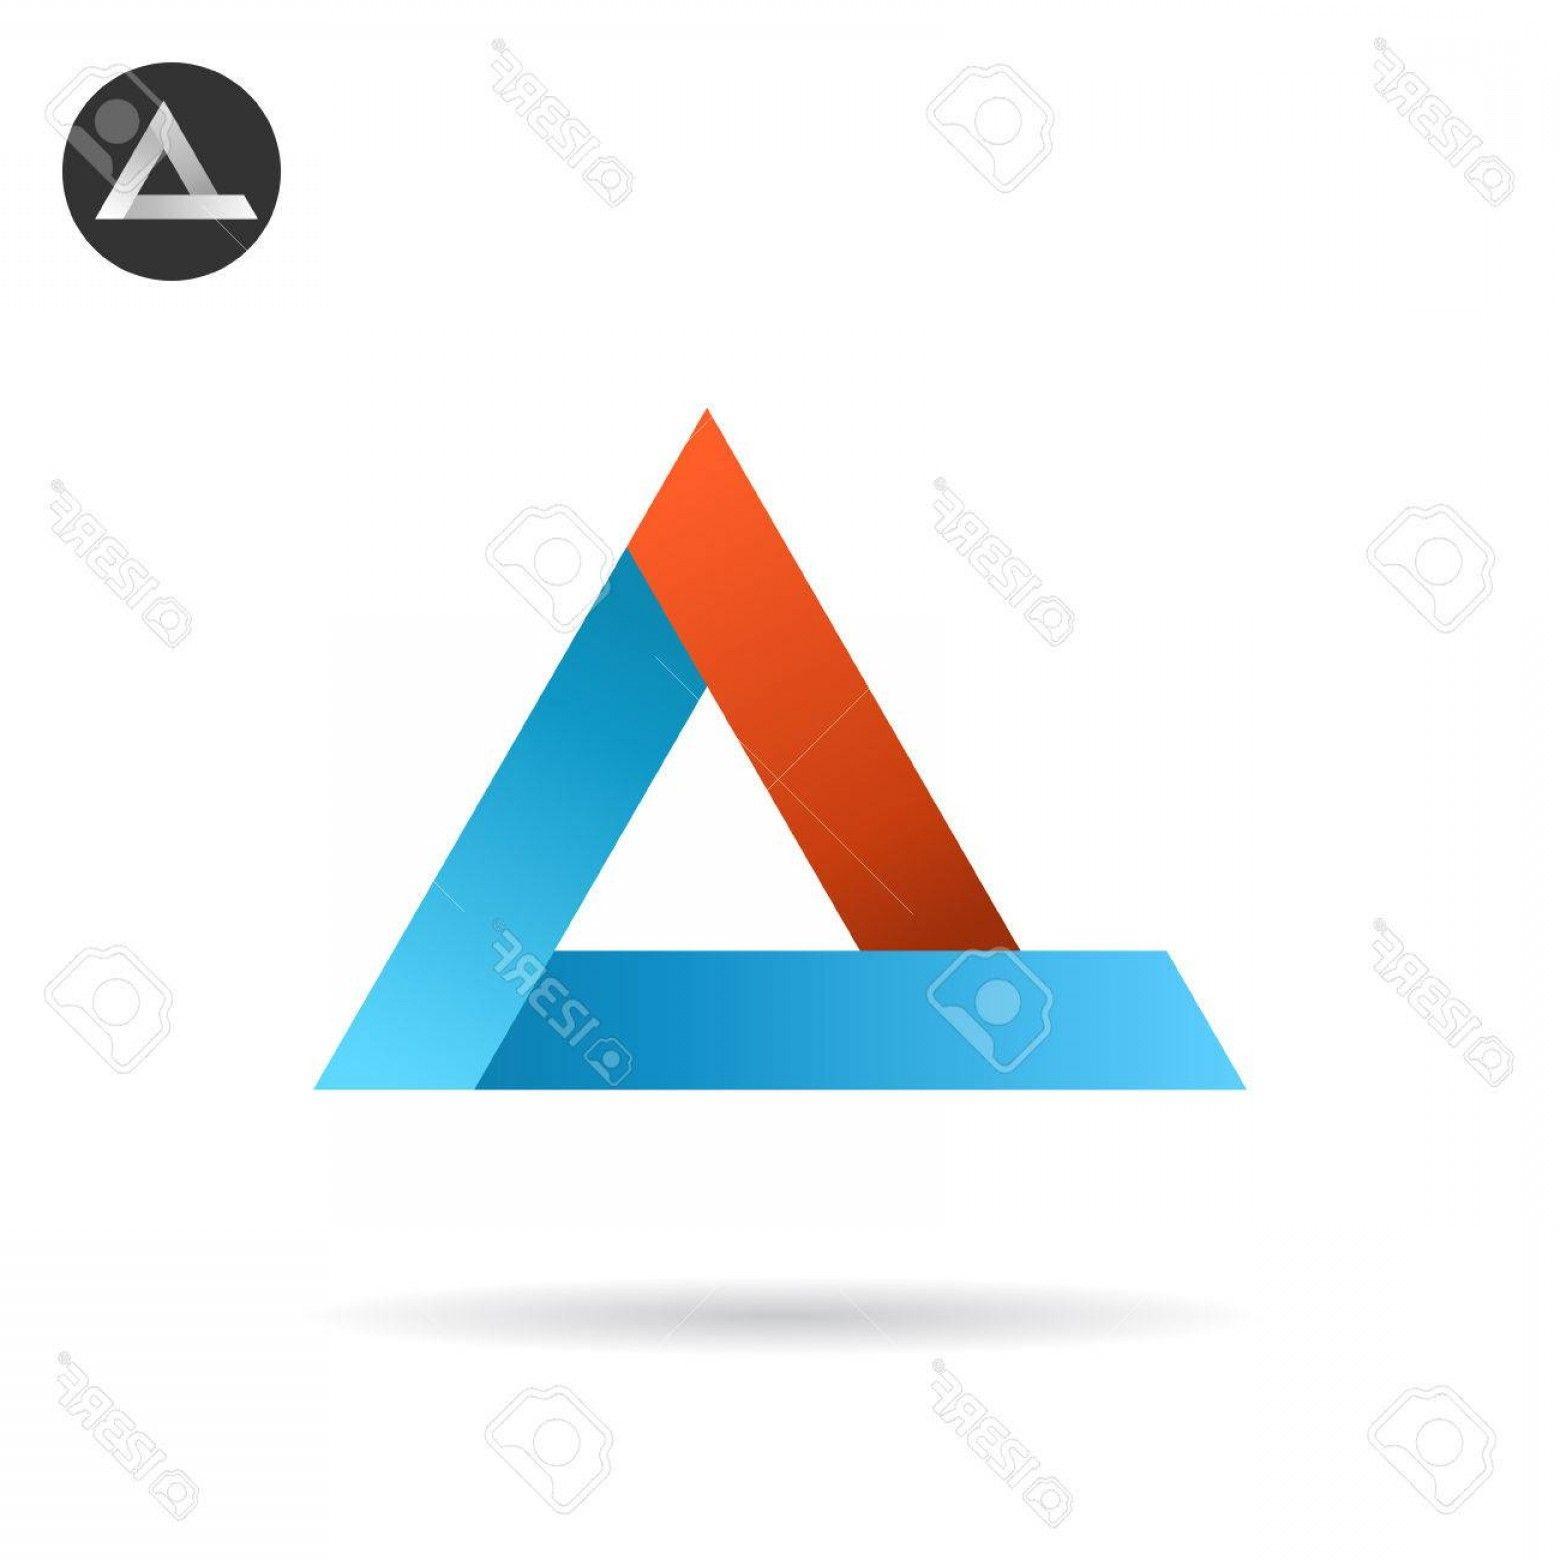 Arrows with Red and White Logo - Photostock Vector Delta Arrow Logo In Ribbon Style Red And Blue ...